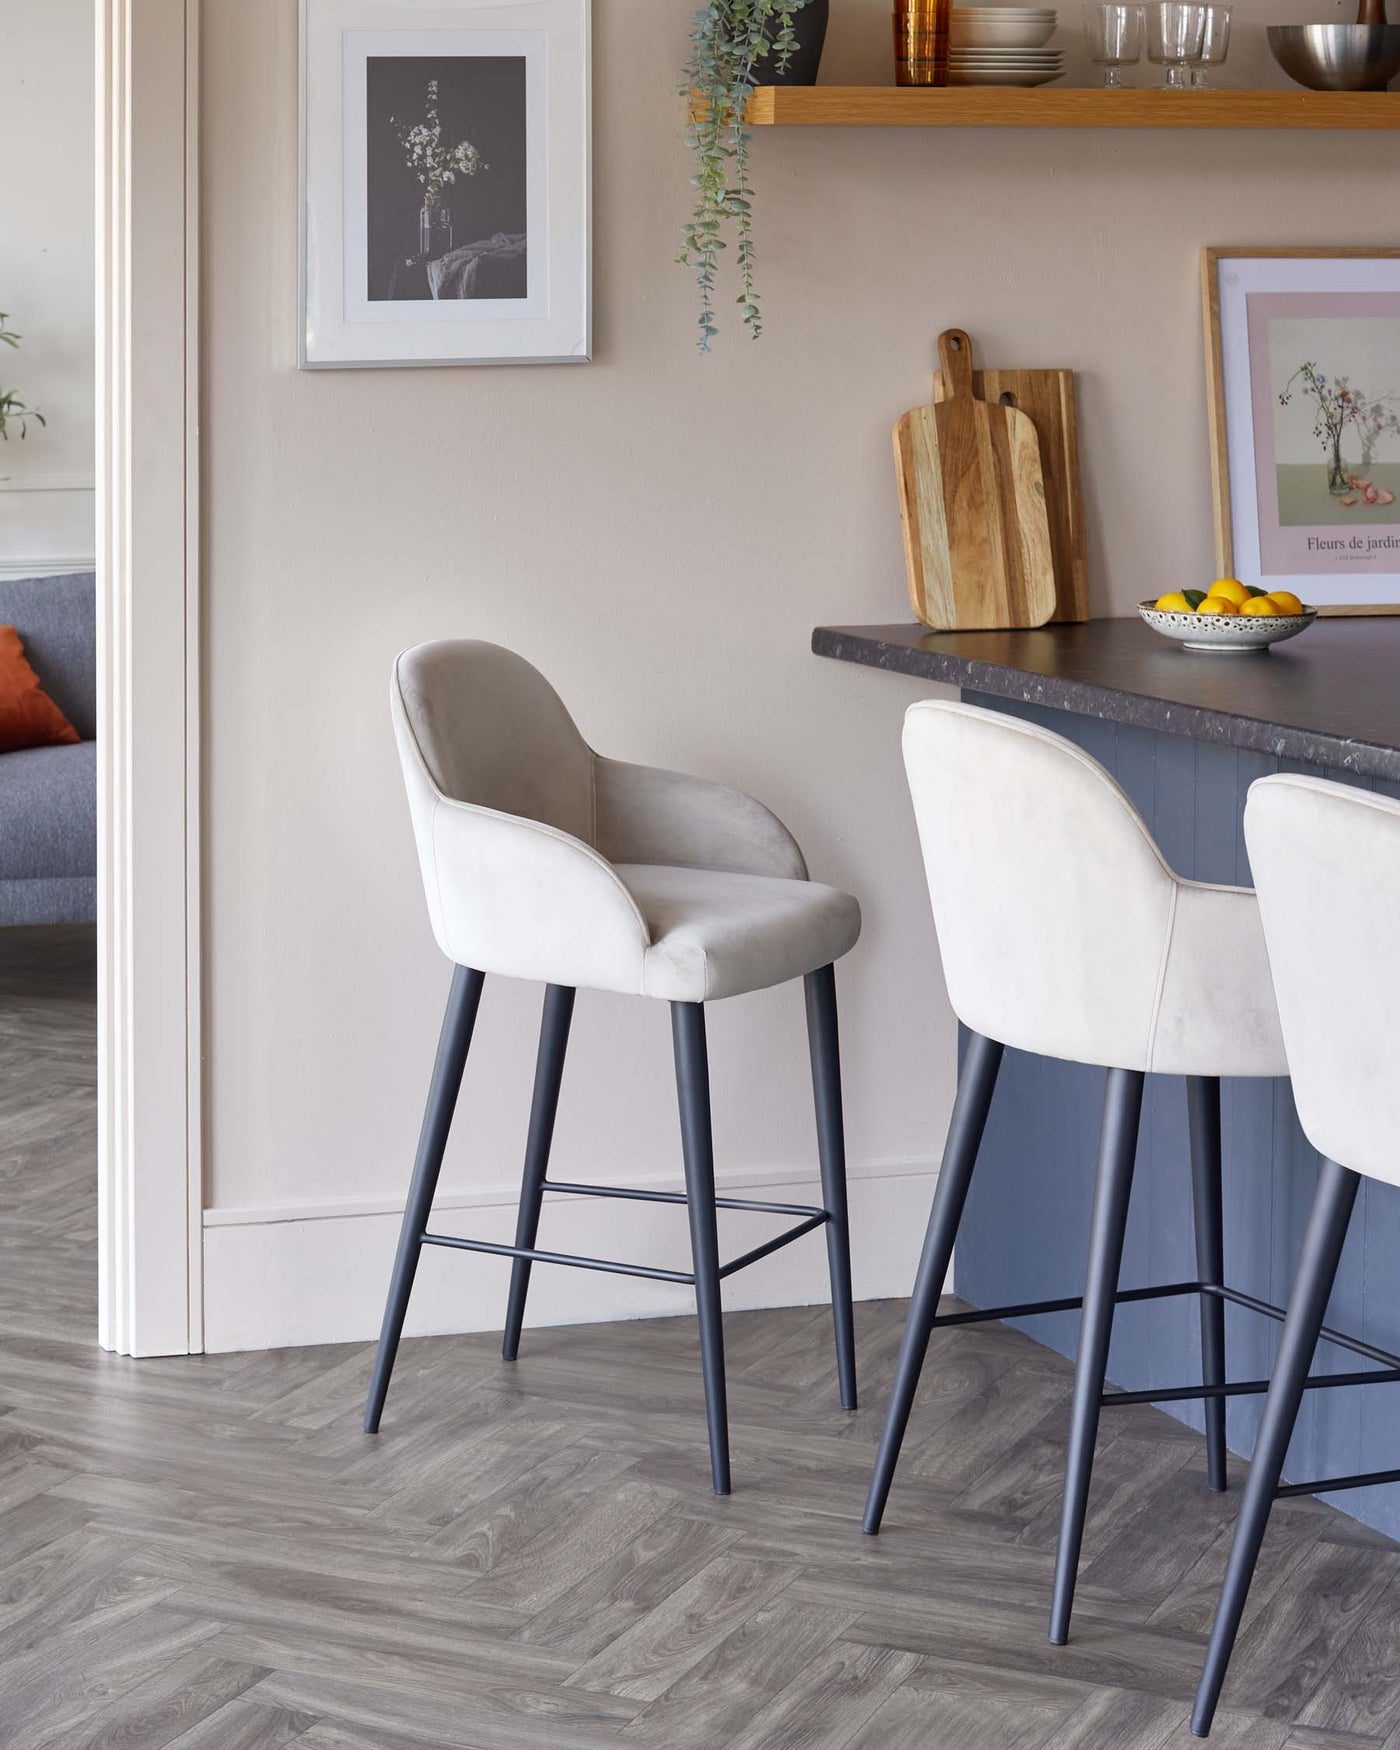 Modern bar stools with elegant light grey upholstery and slim black metal legs, positioned at a kitchen counter with a dark surface.